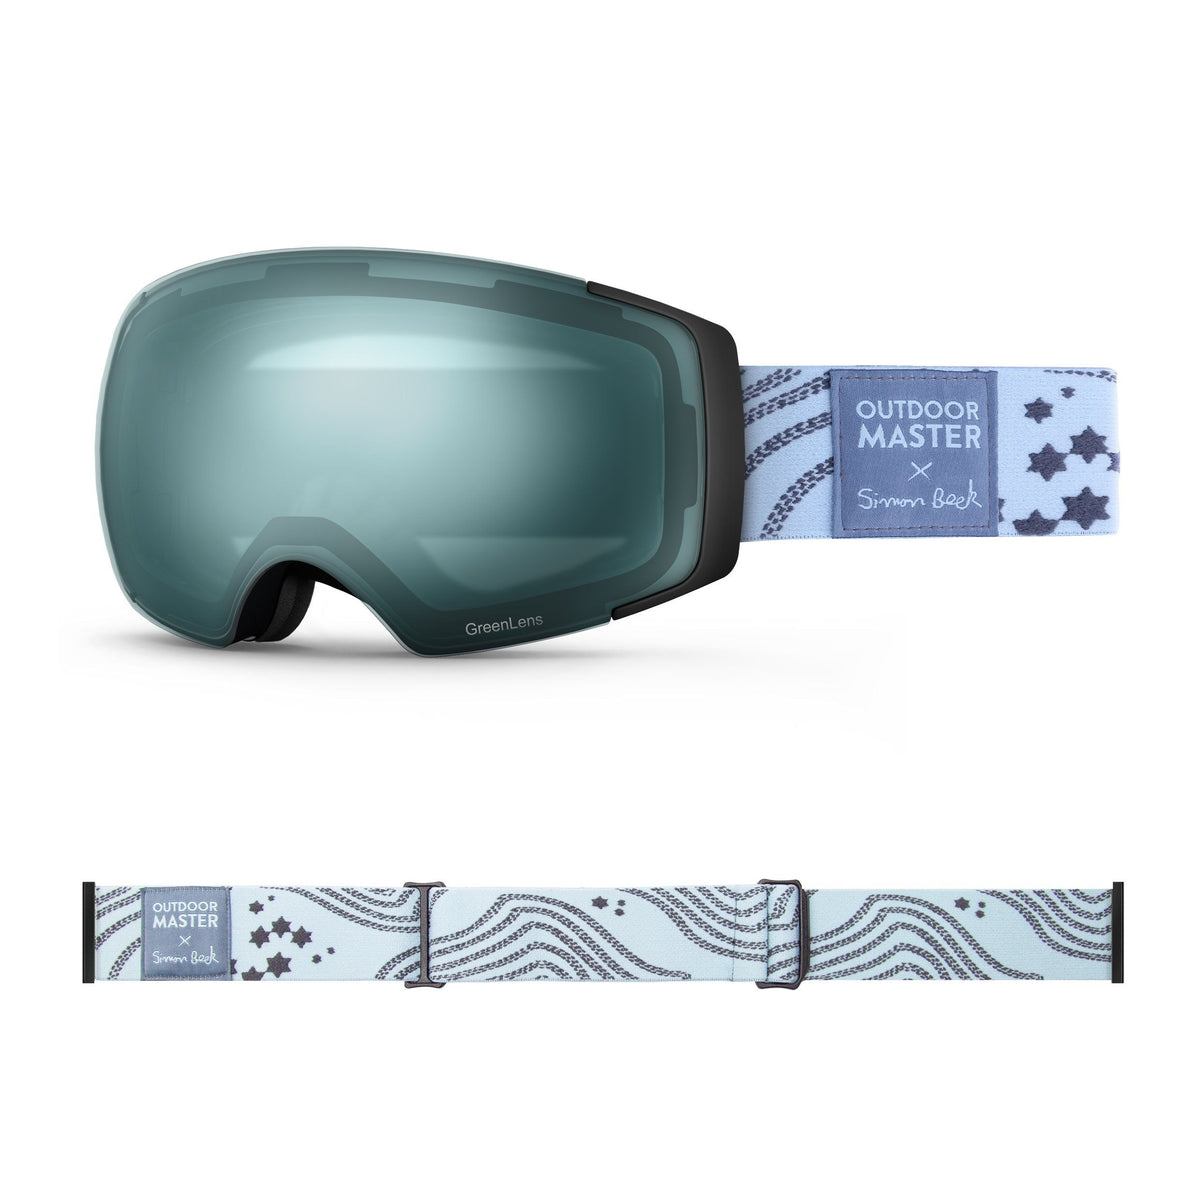 OutdoorMaster x Simon Beck Ski Goggles Pro Series - Snowshoeing Art Limited Edition OutdoorMaster GreenLens VLT 20% TAC Green Polarized Star Road-Lightsteelblue